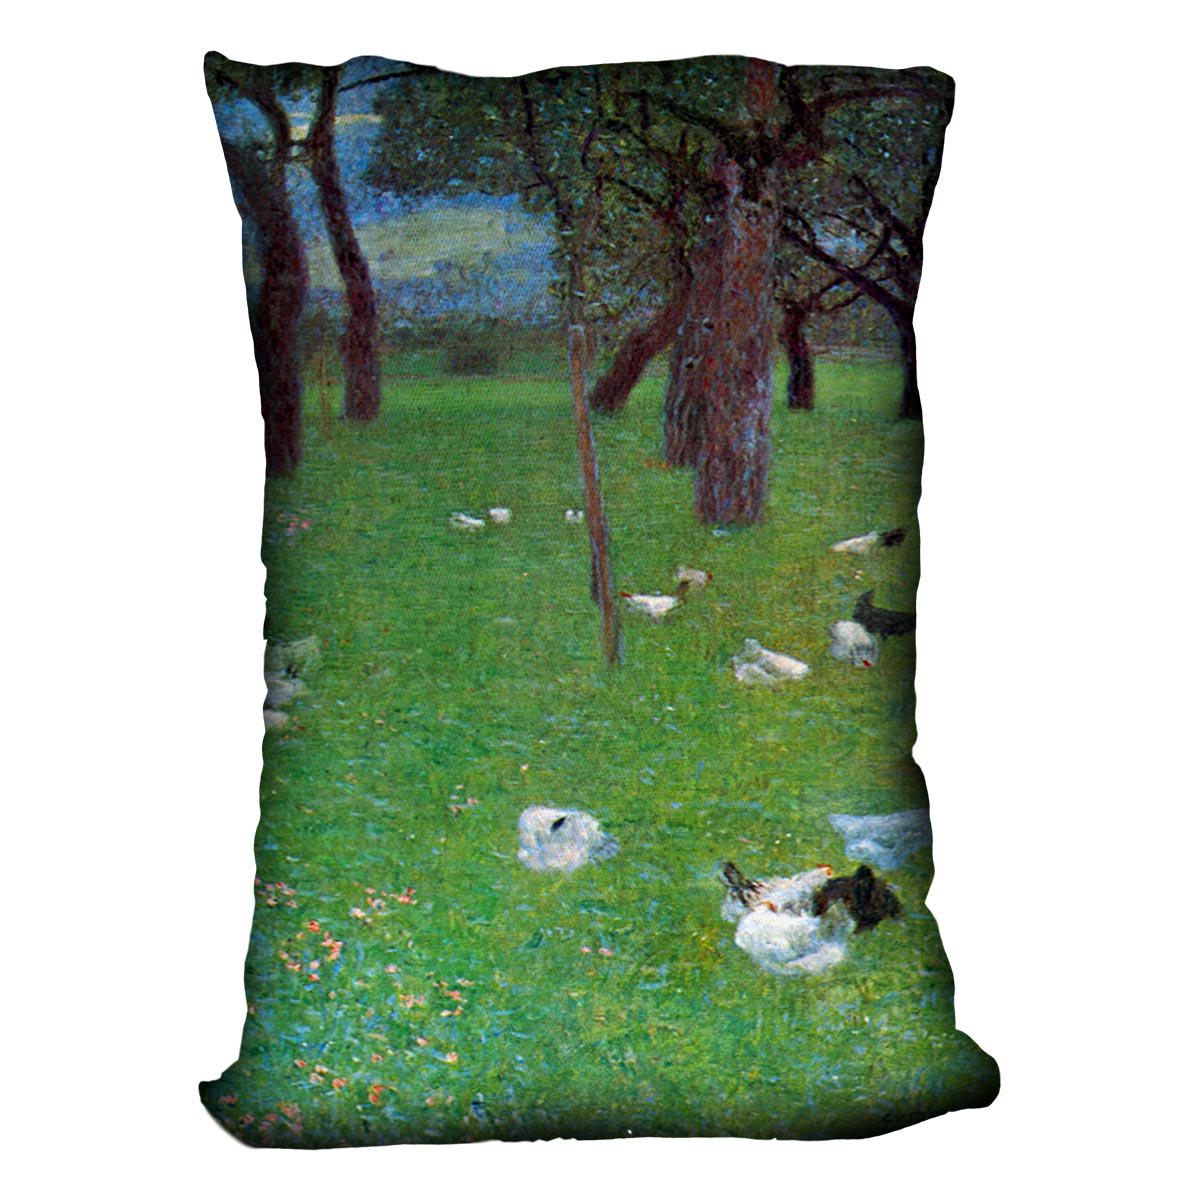 After the rain garden with chickens in St. Agatha by Klimt Cushion